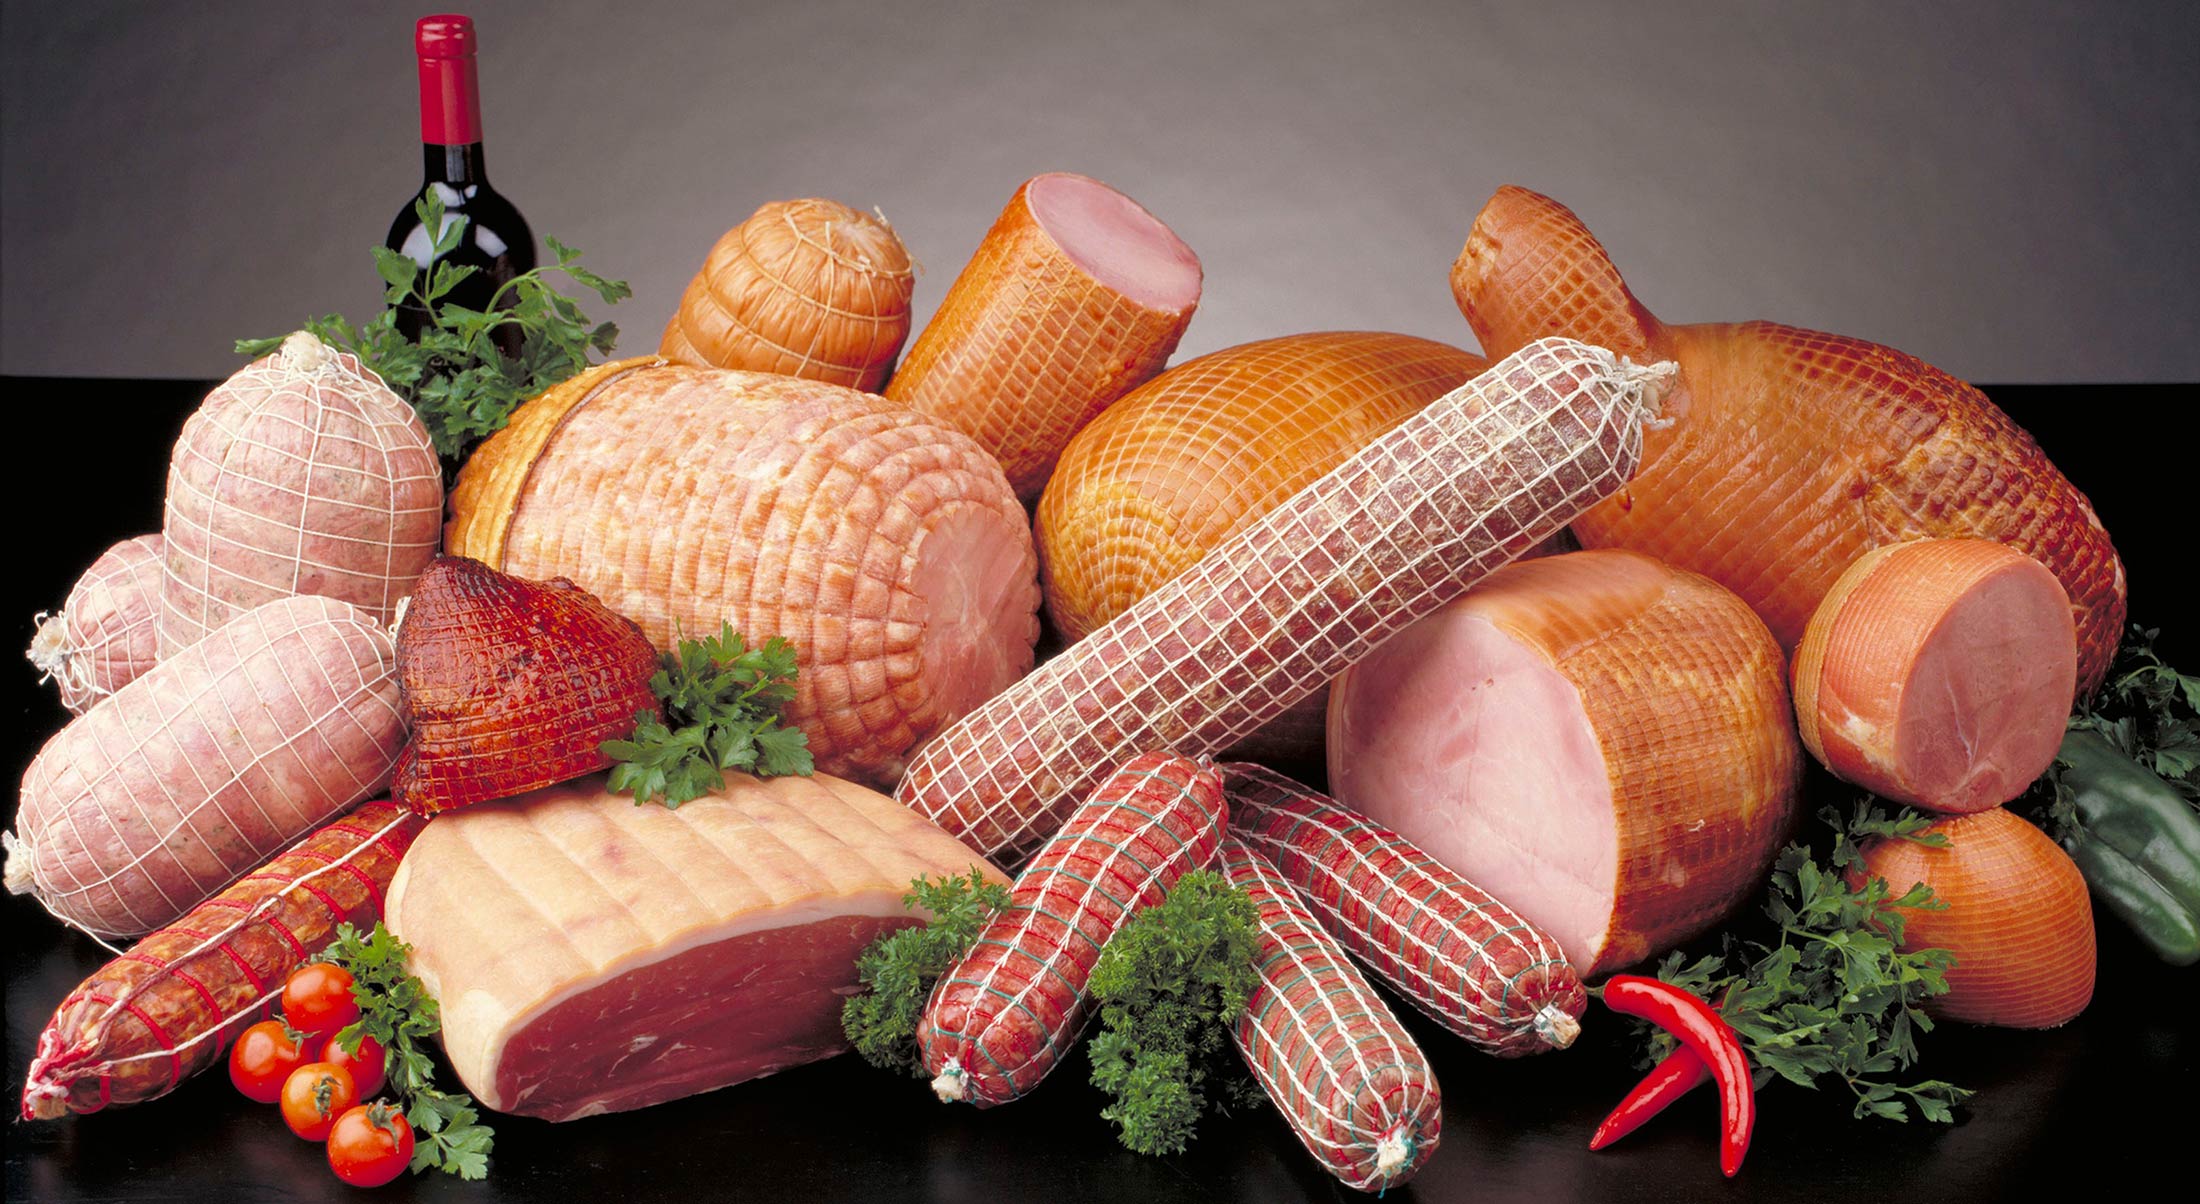 Complete Butcher Supplies sell a range of netting products